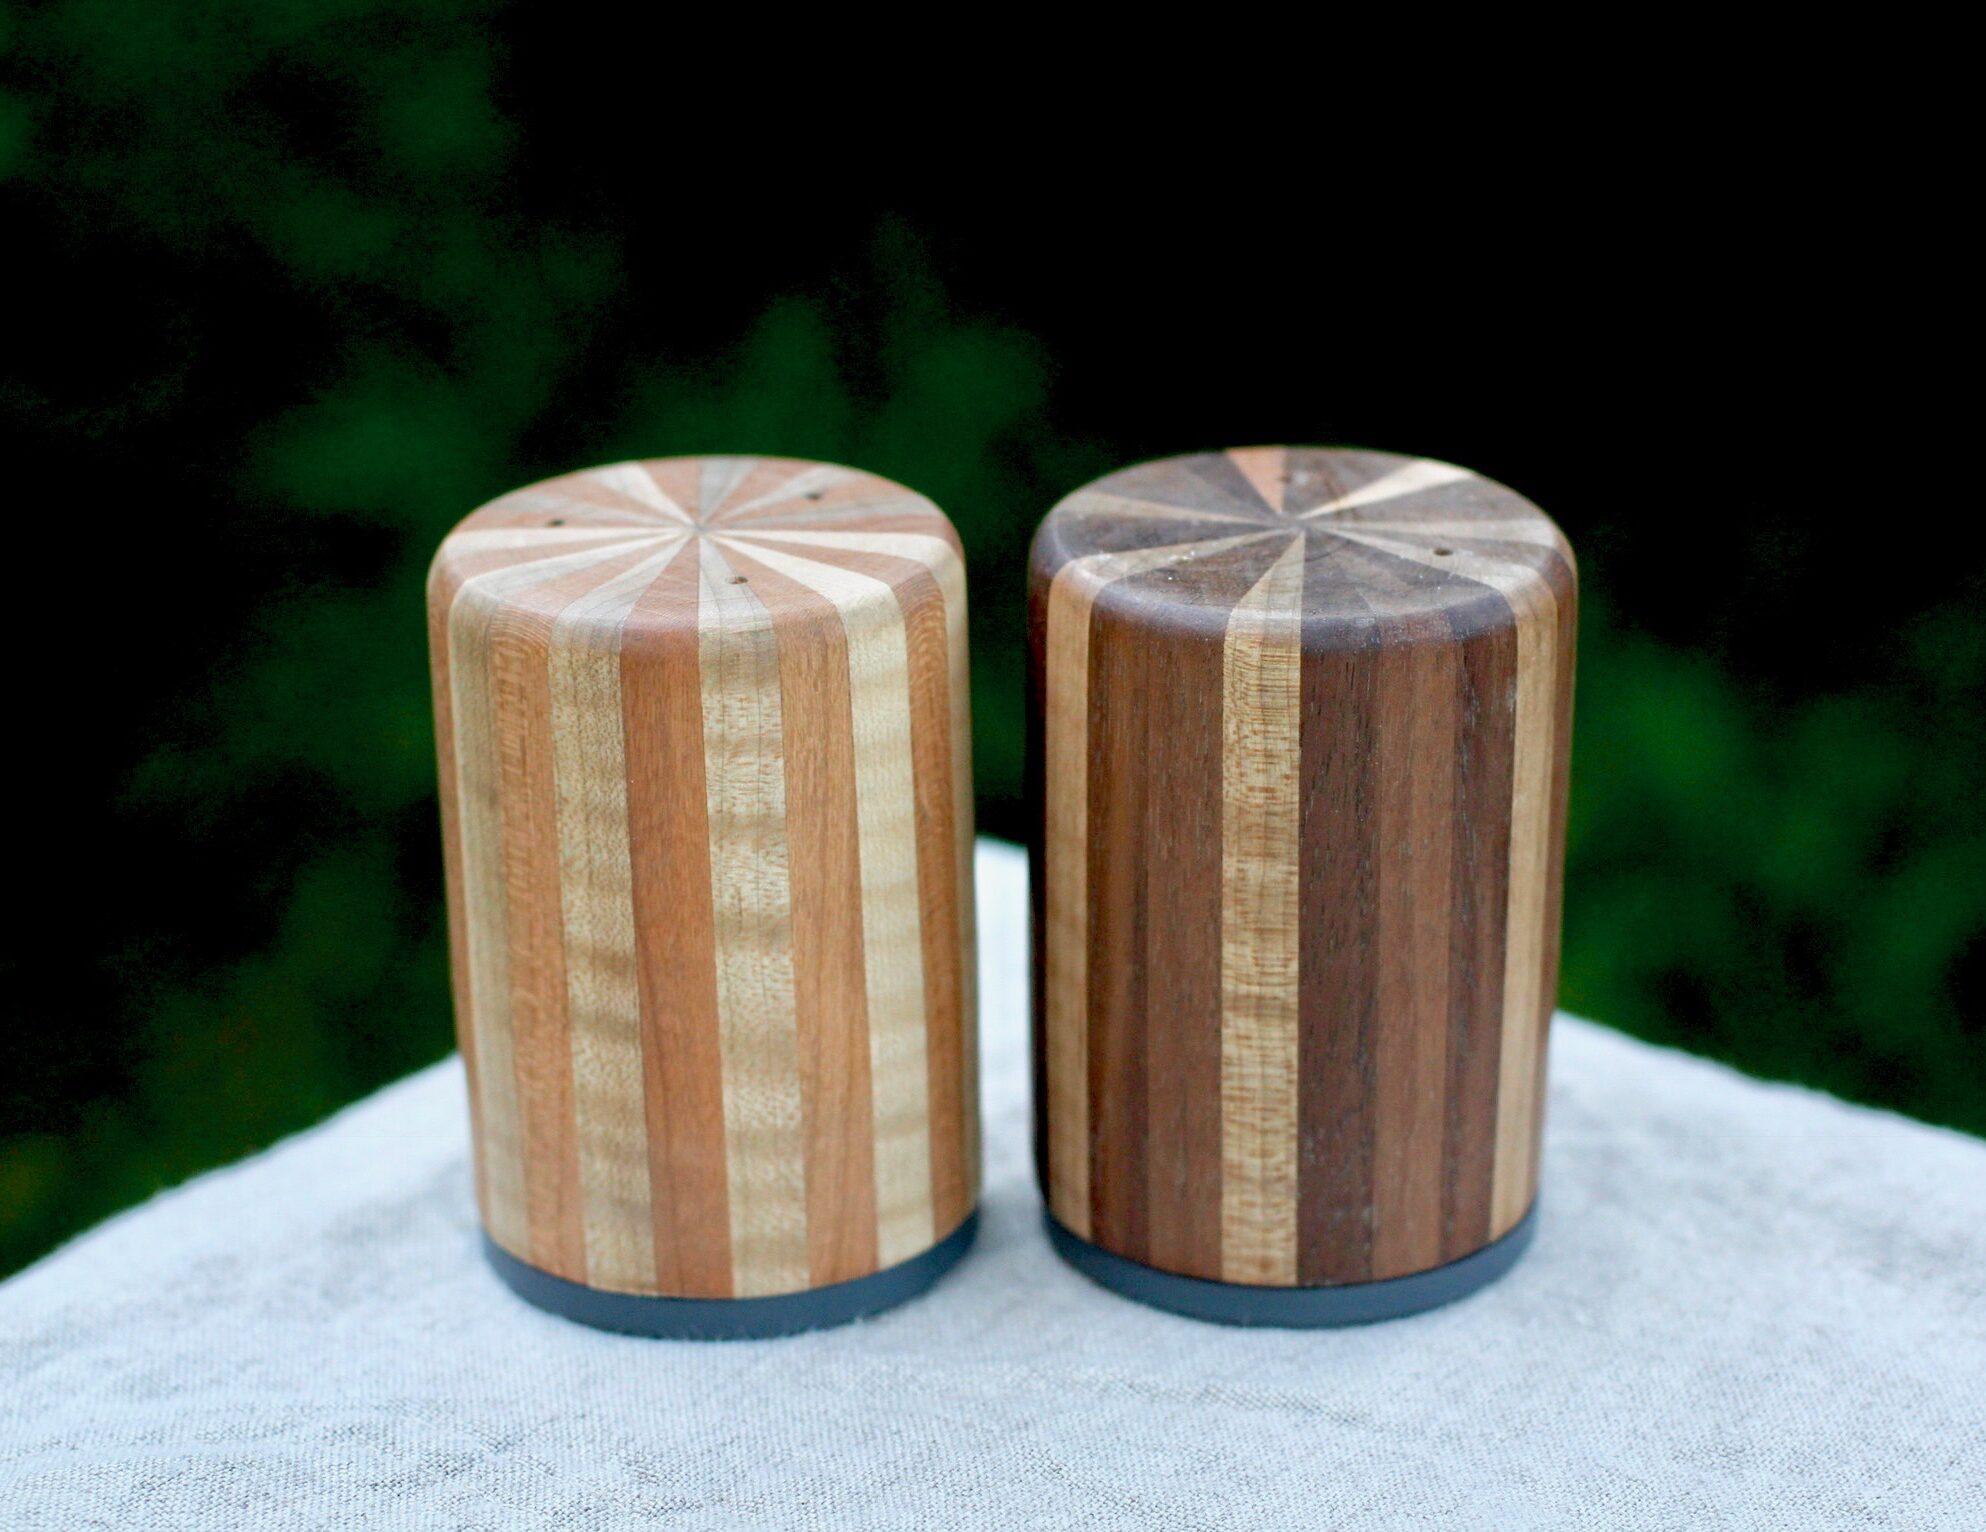 Salt and pepper shakers from scrap wood